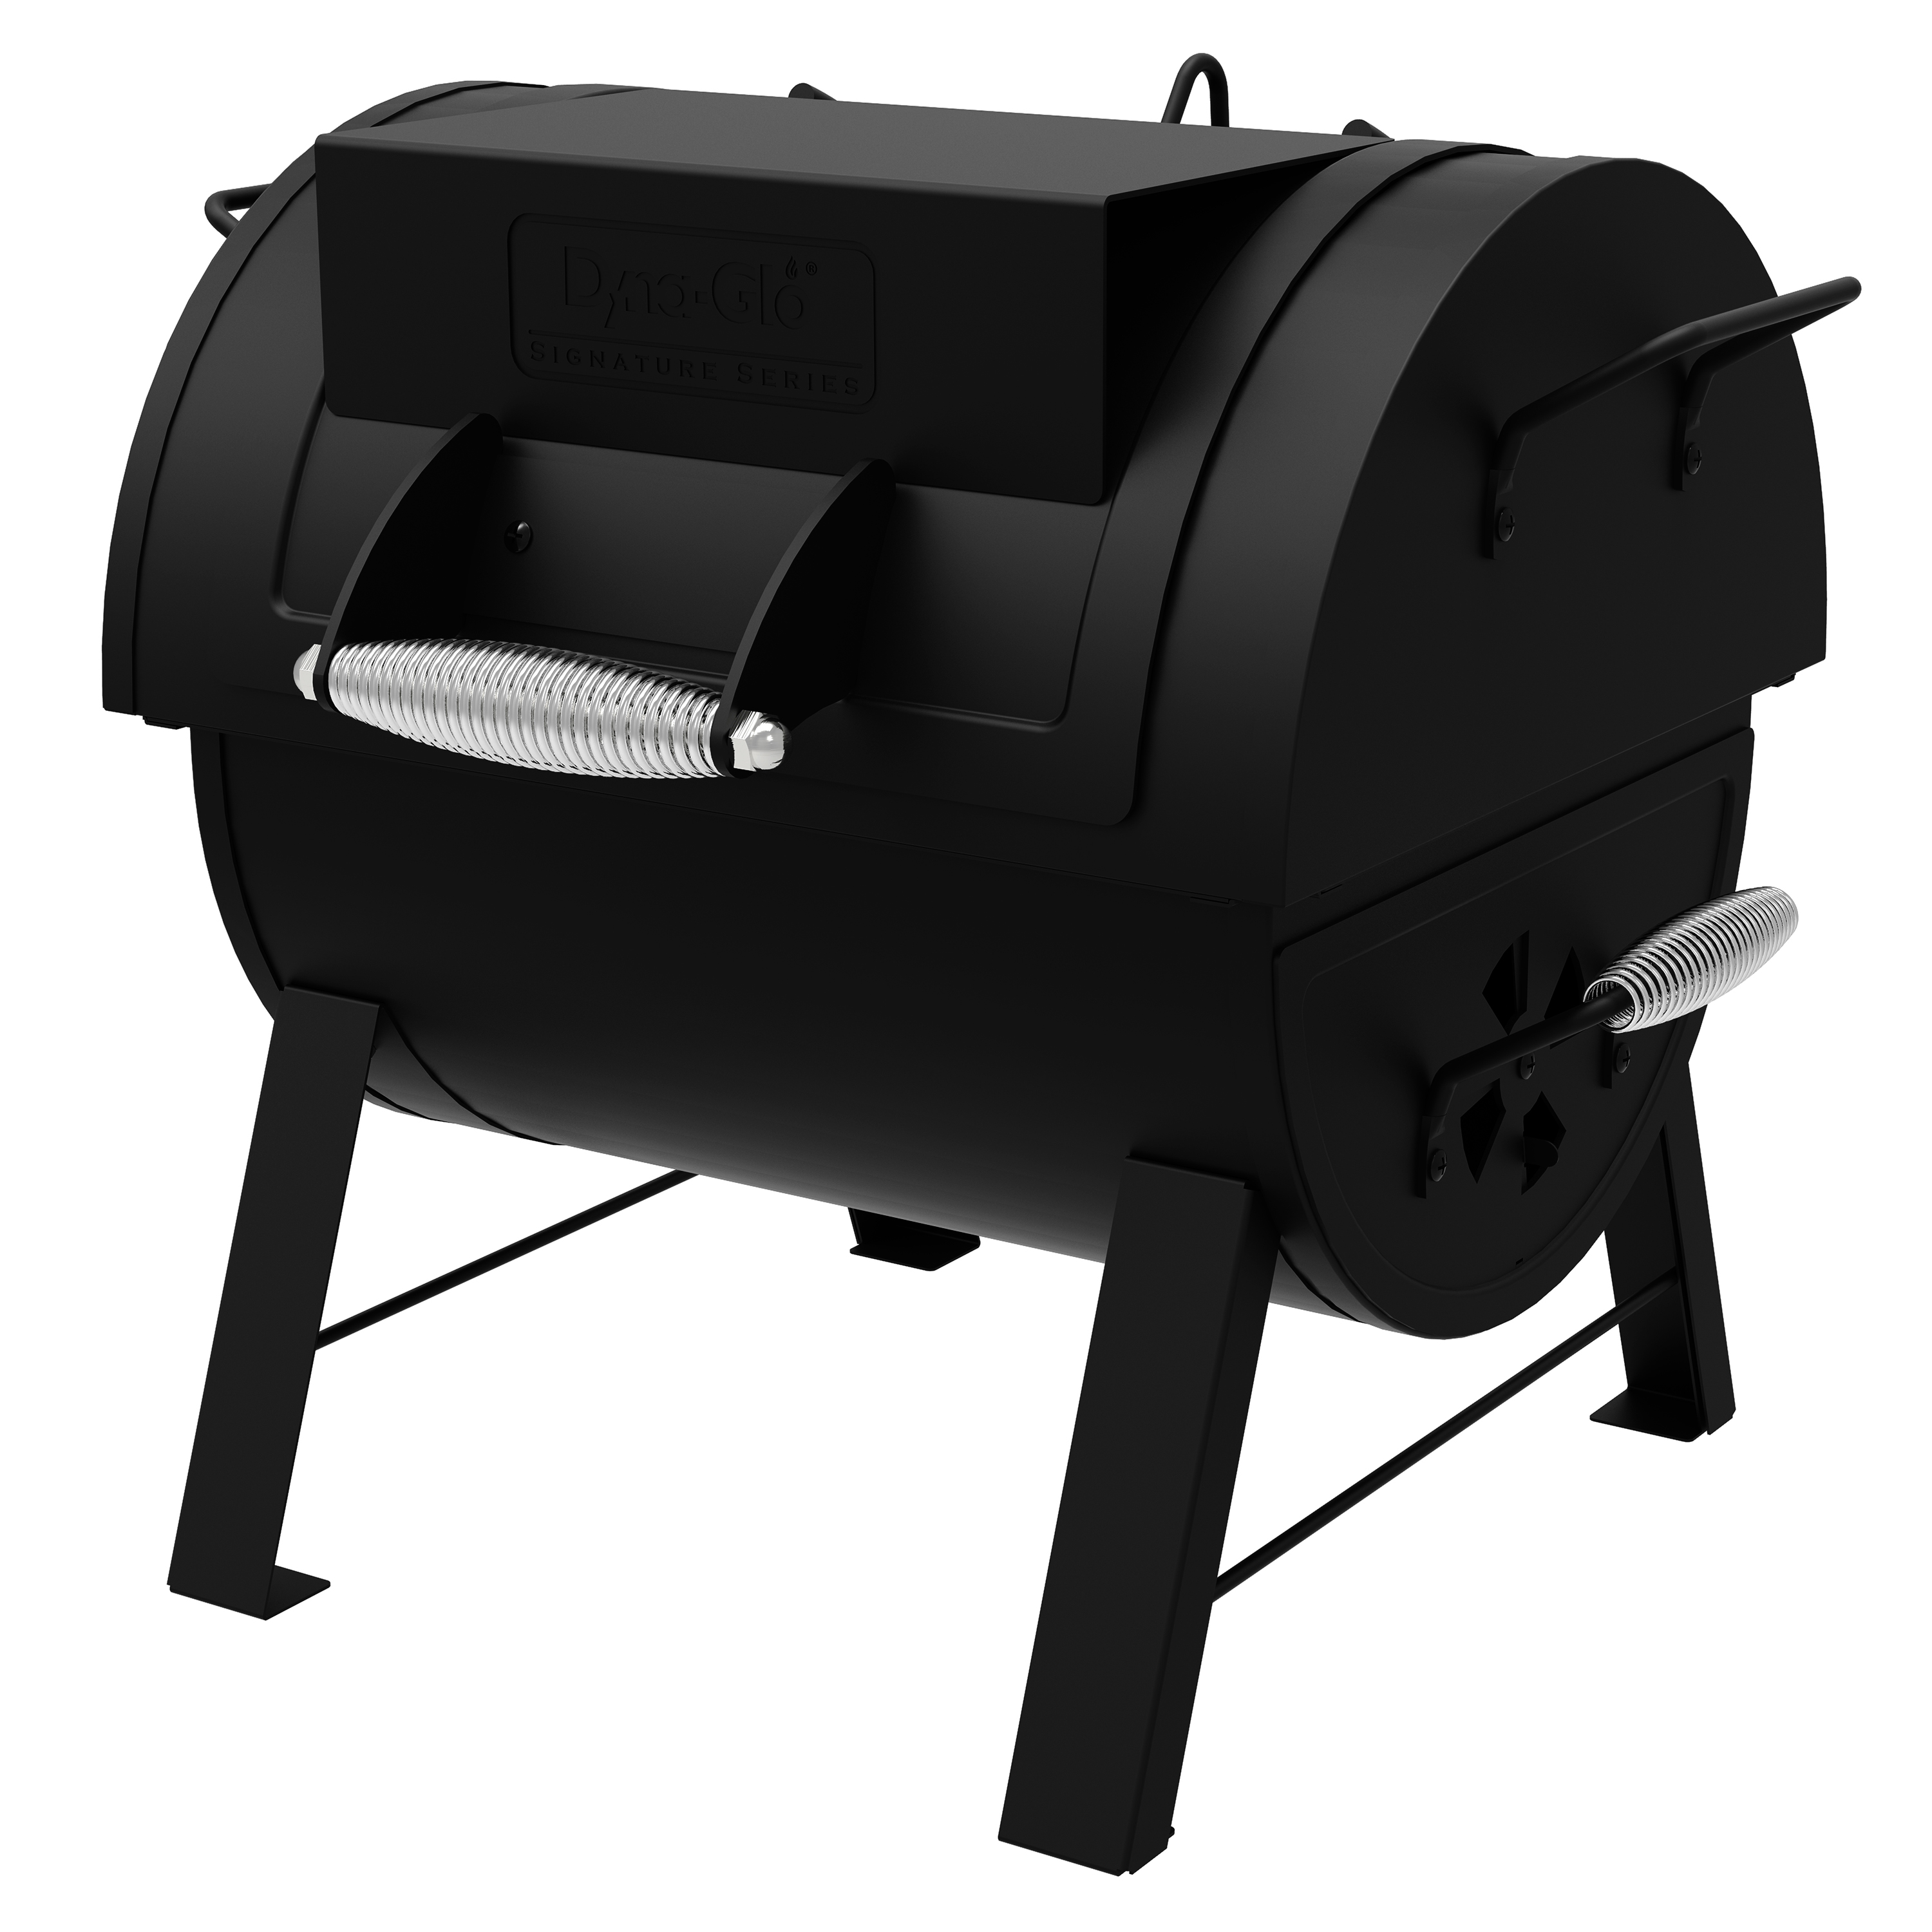 Dyna-Glo Portable Tabletop Charcoal Grill & Side Firebox - image 1 of 11